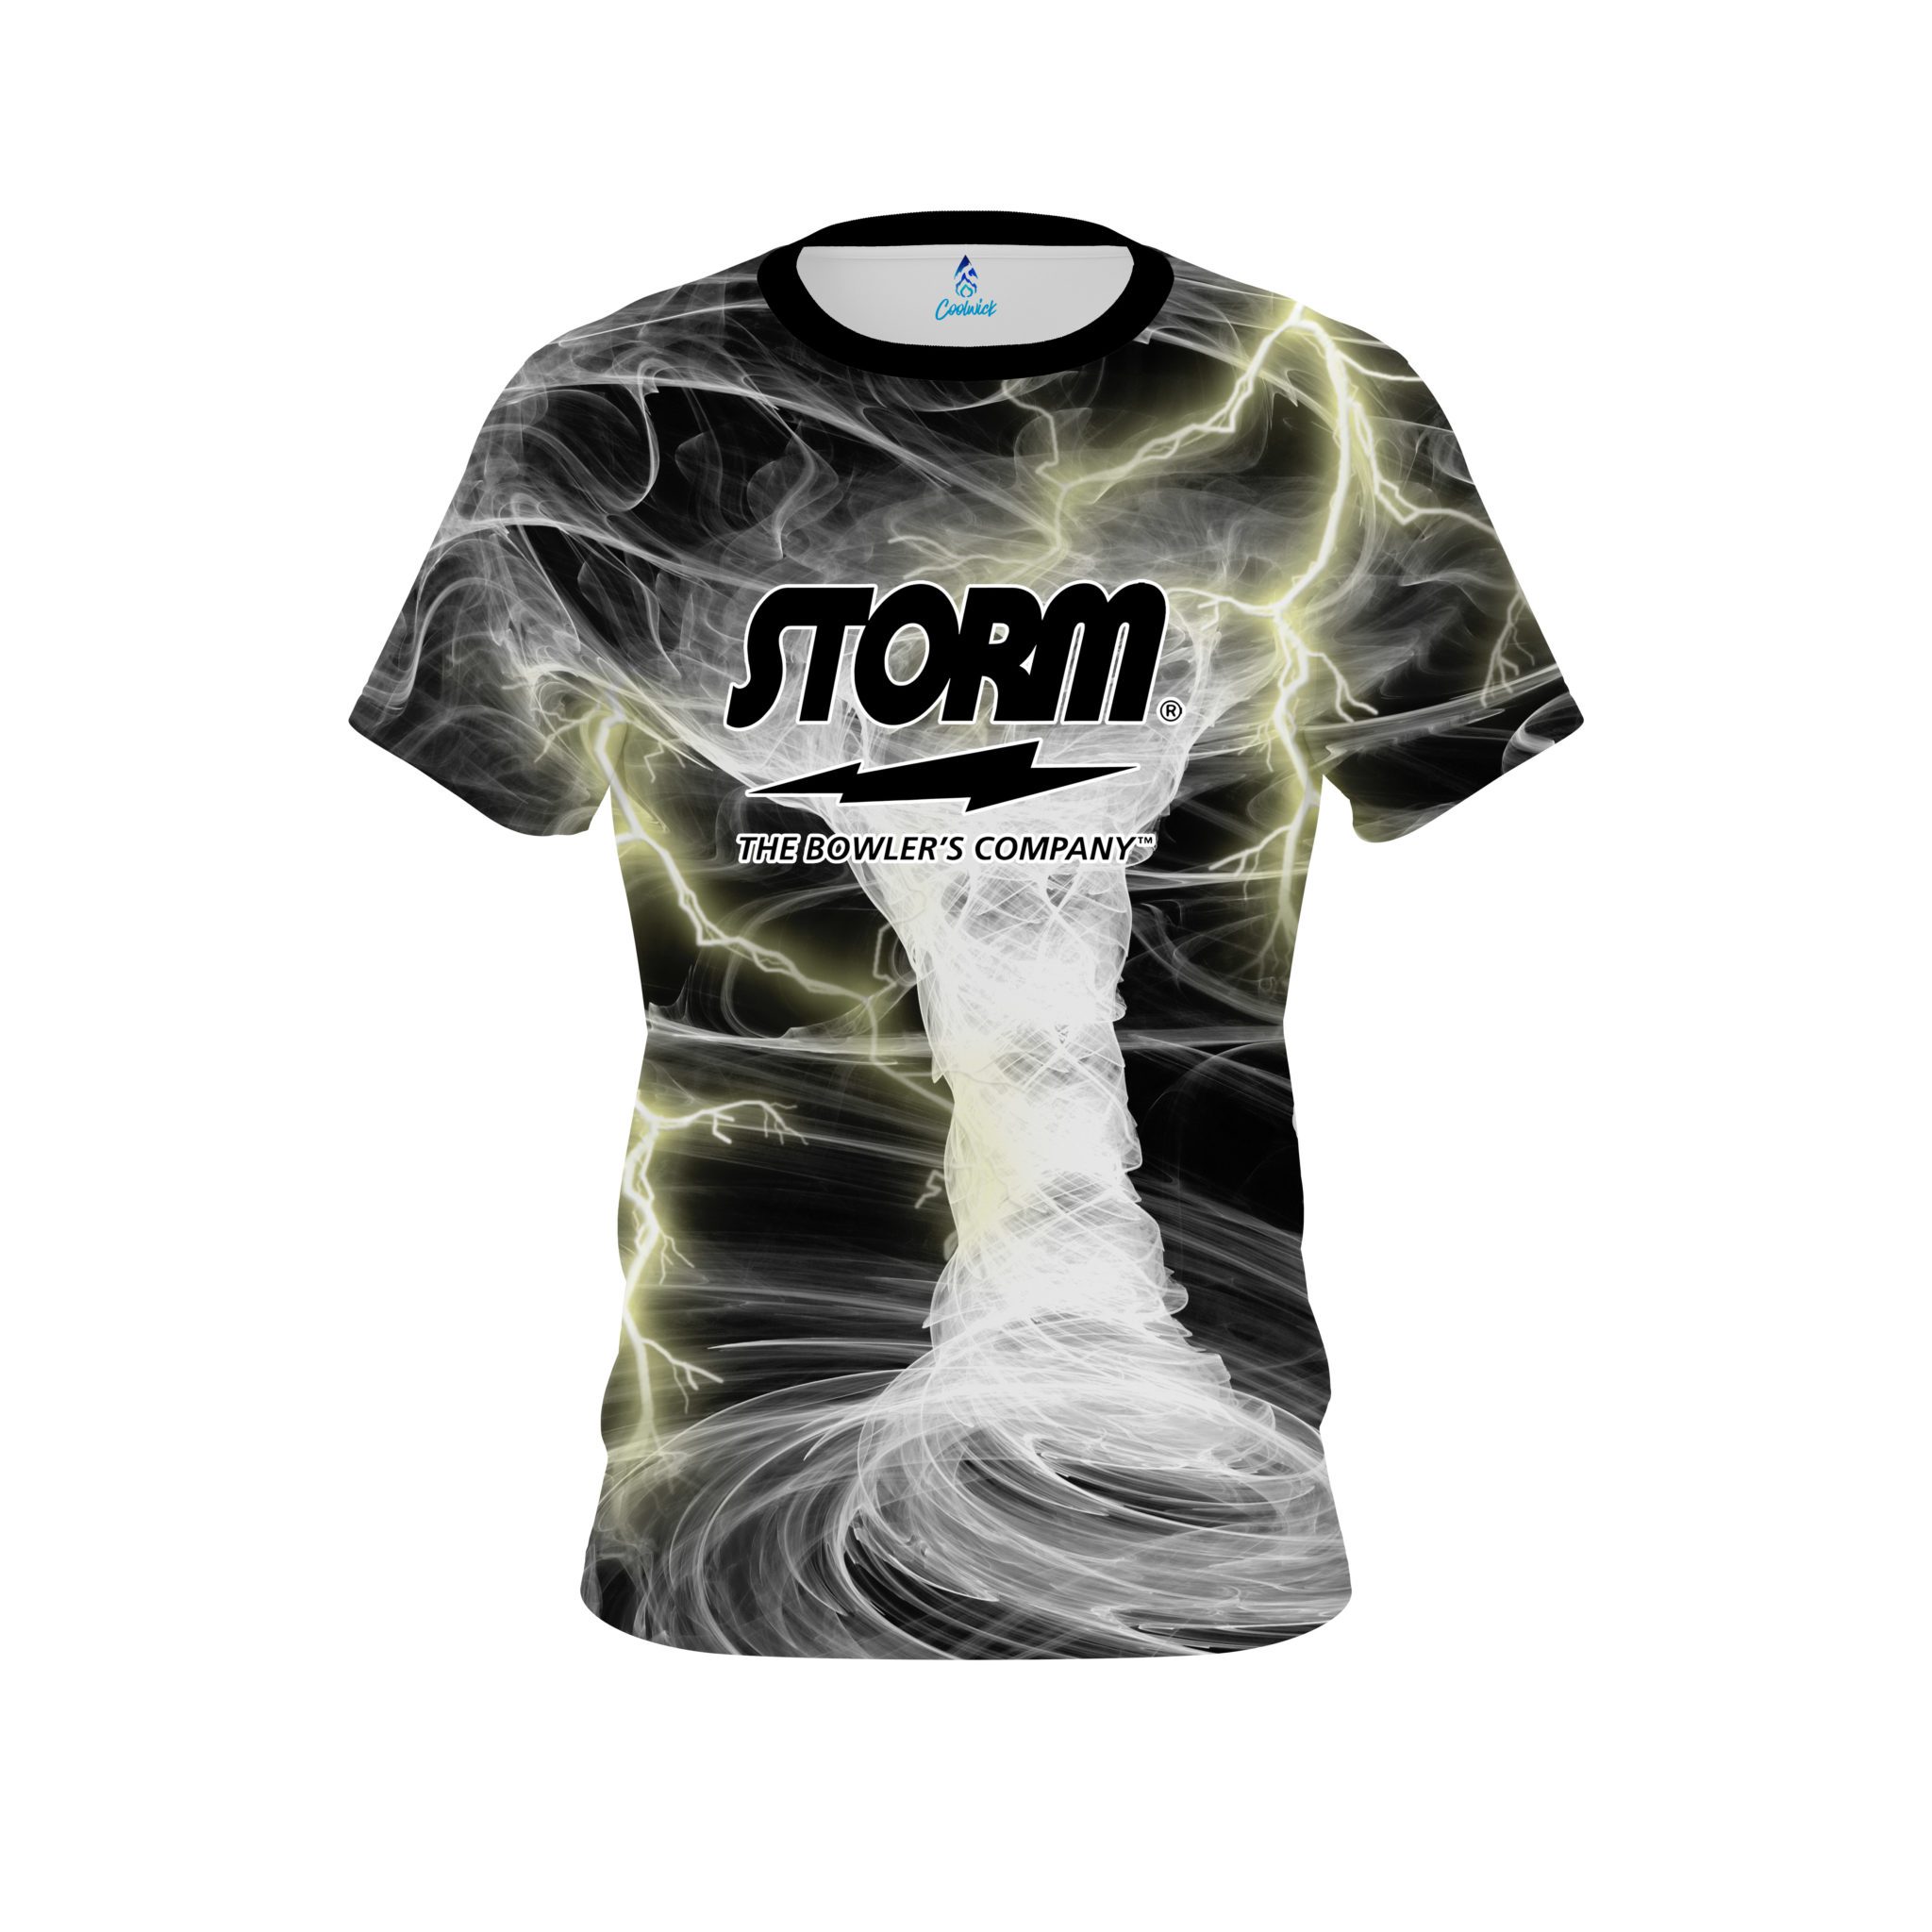 Storm Electrical Tornado White CoolWick Bowling Jersey